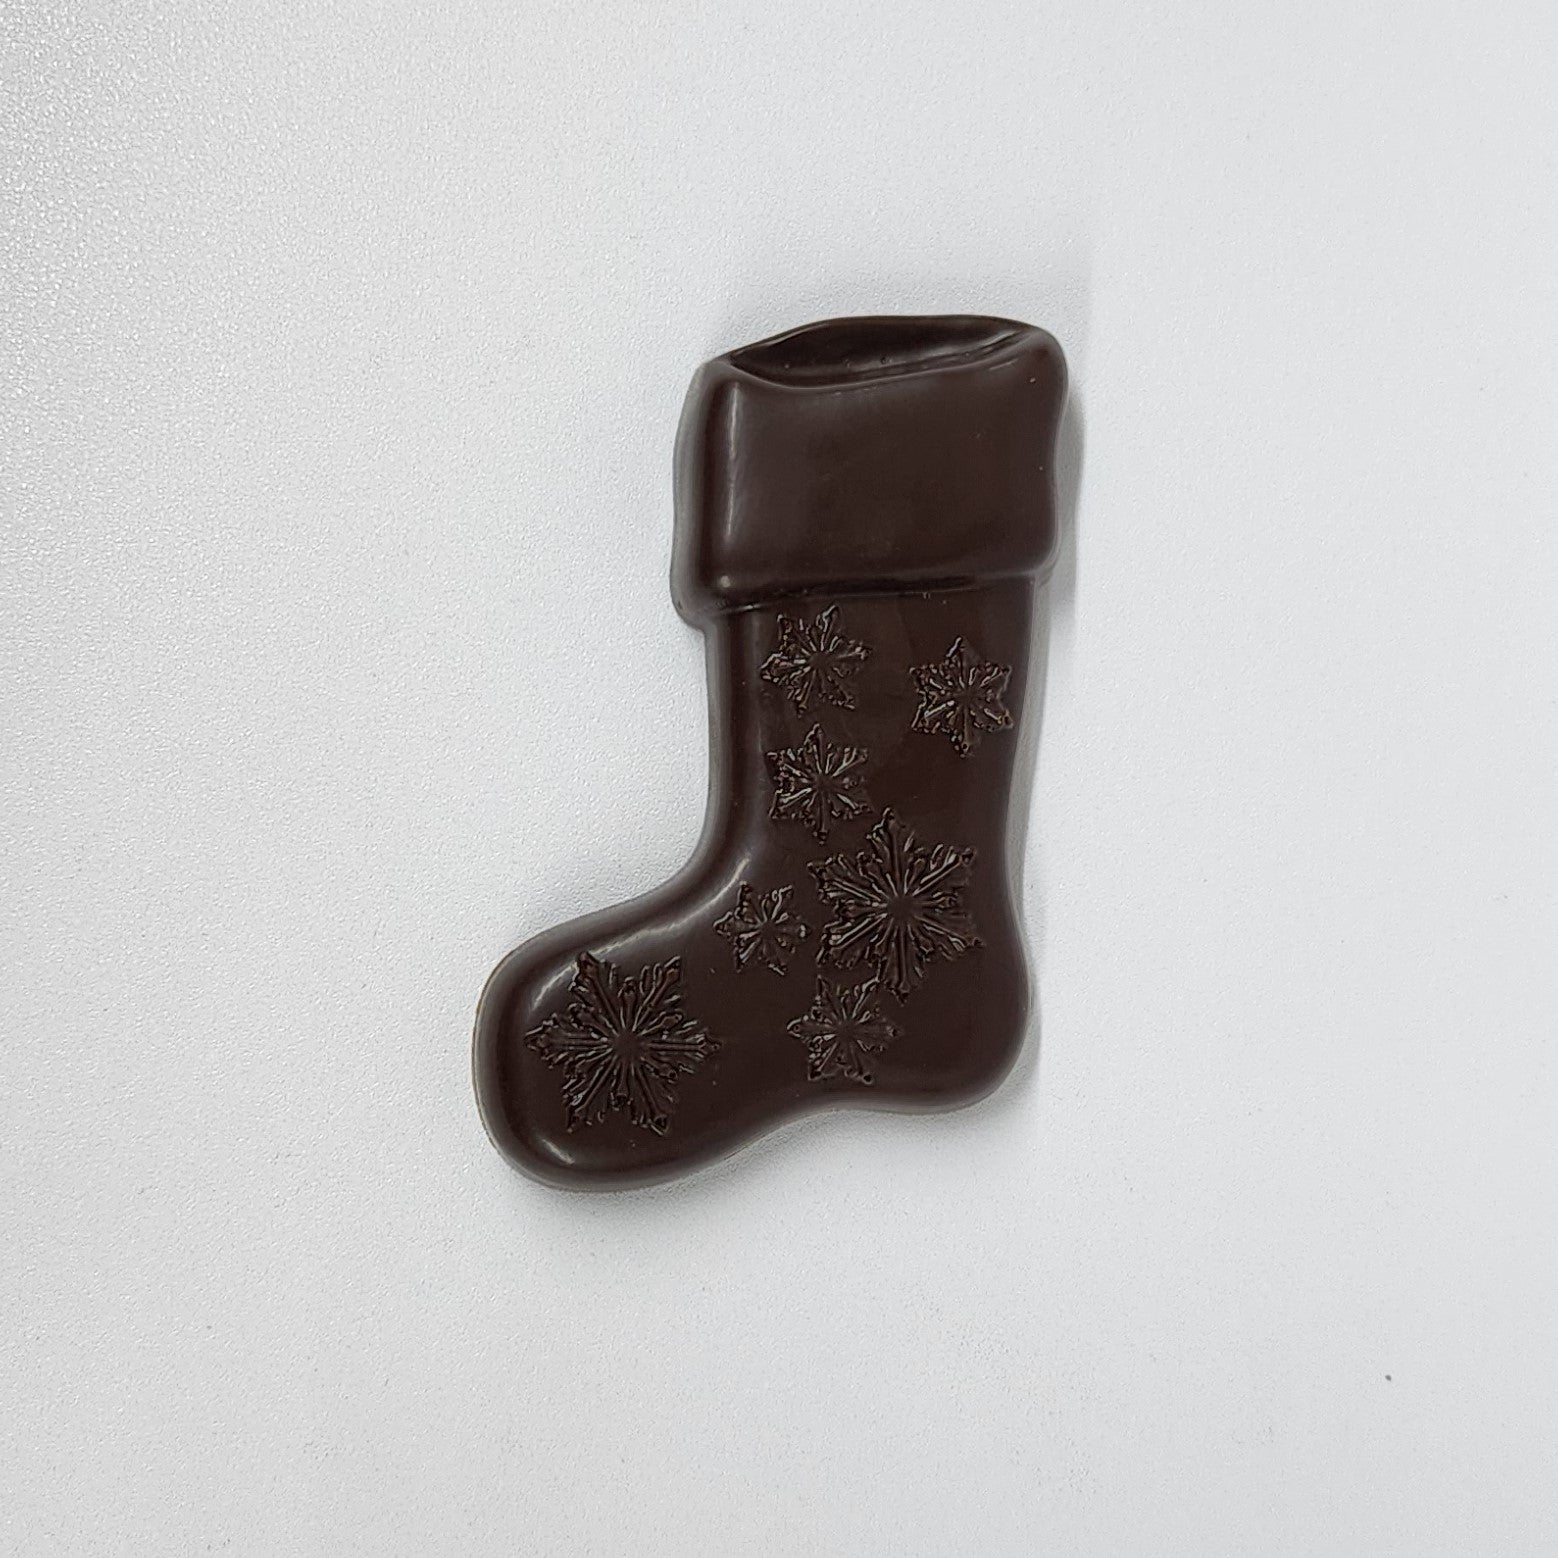 Solid dark chocolate stocking with snowflakes